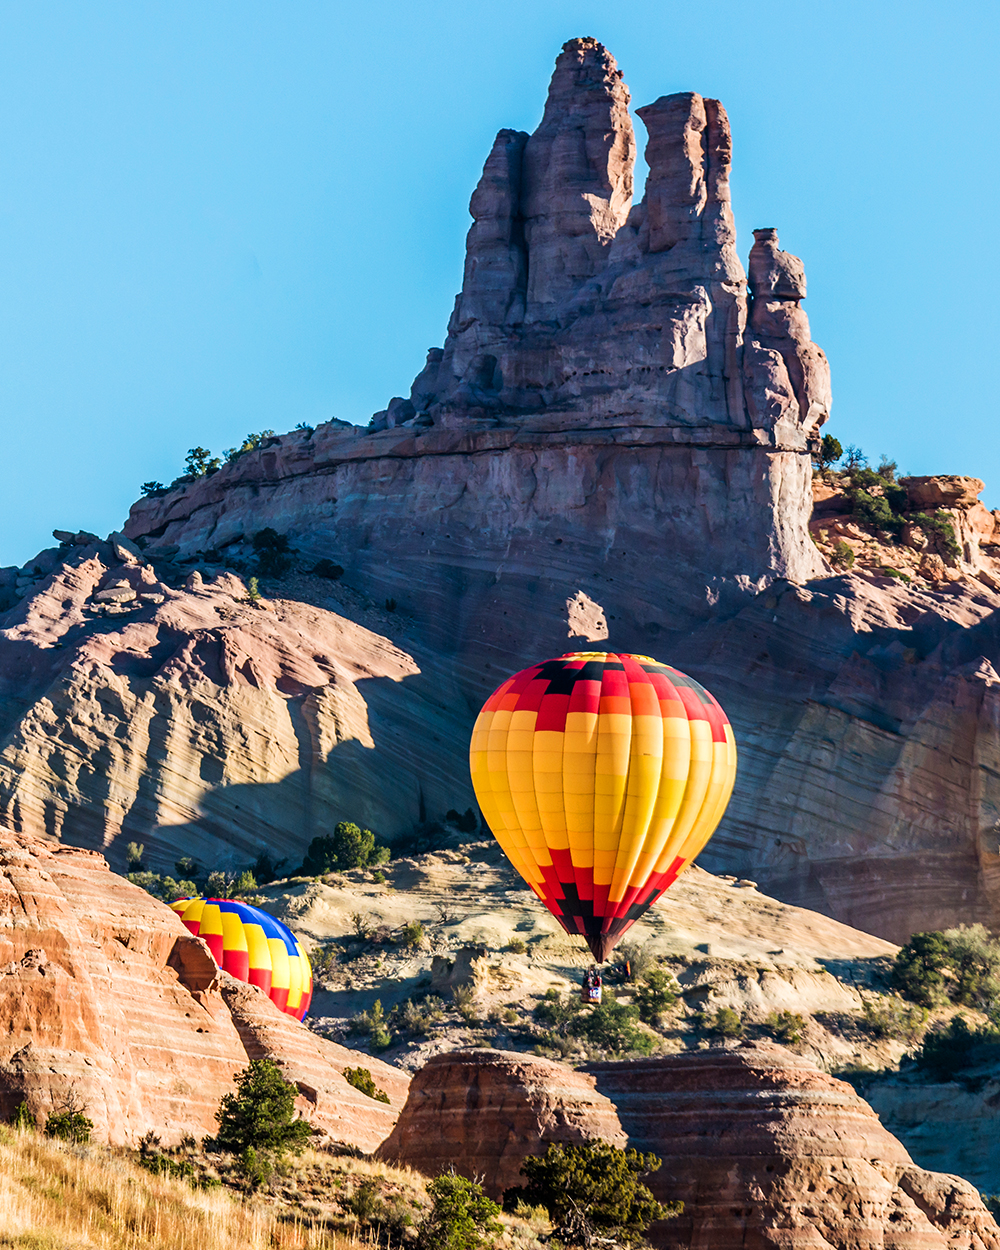 HCSC- Hot air balloons flying over Castle Rock in the Red Rock Canyon near Gallup, New Mexico.